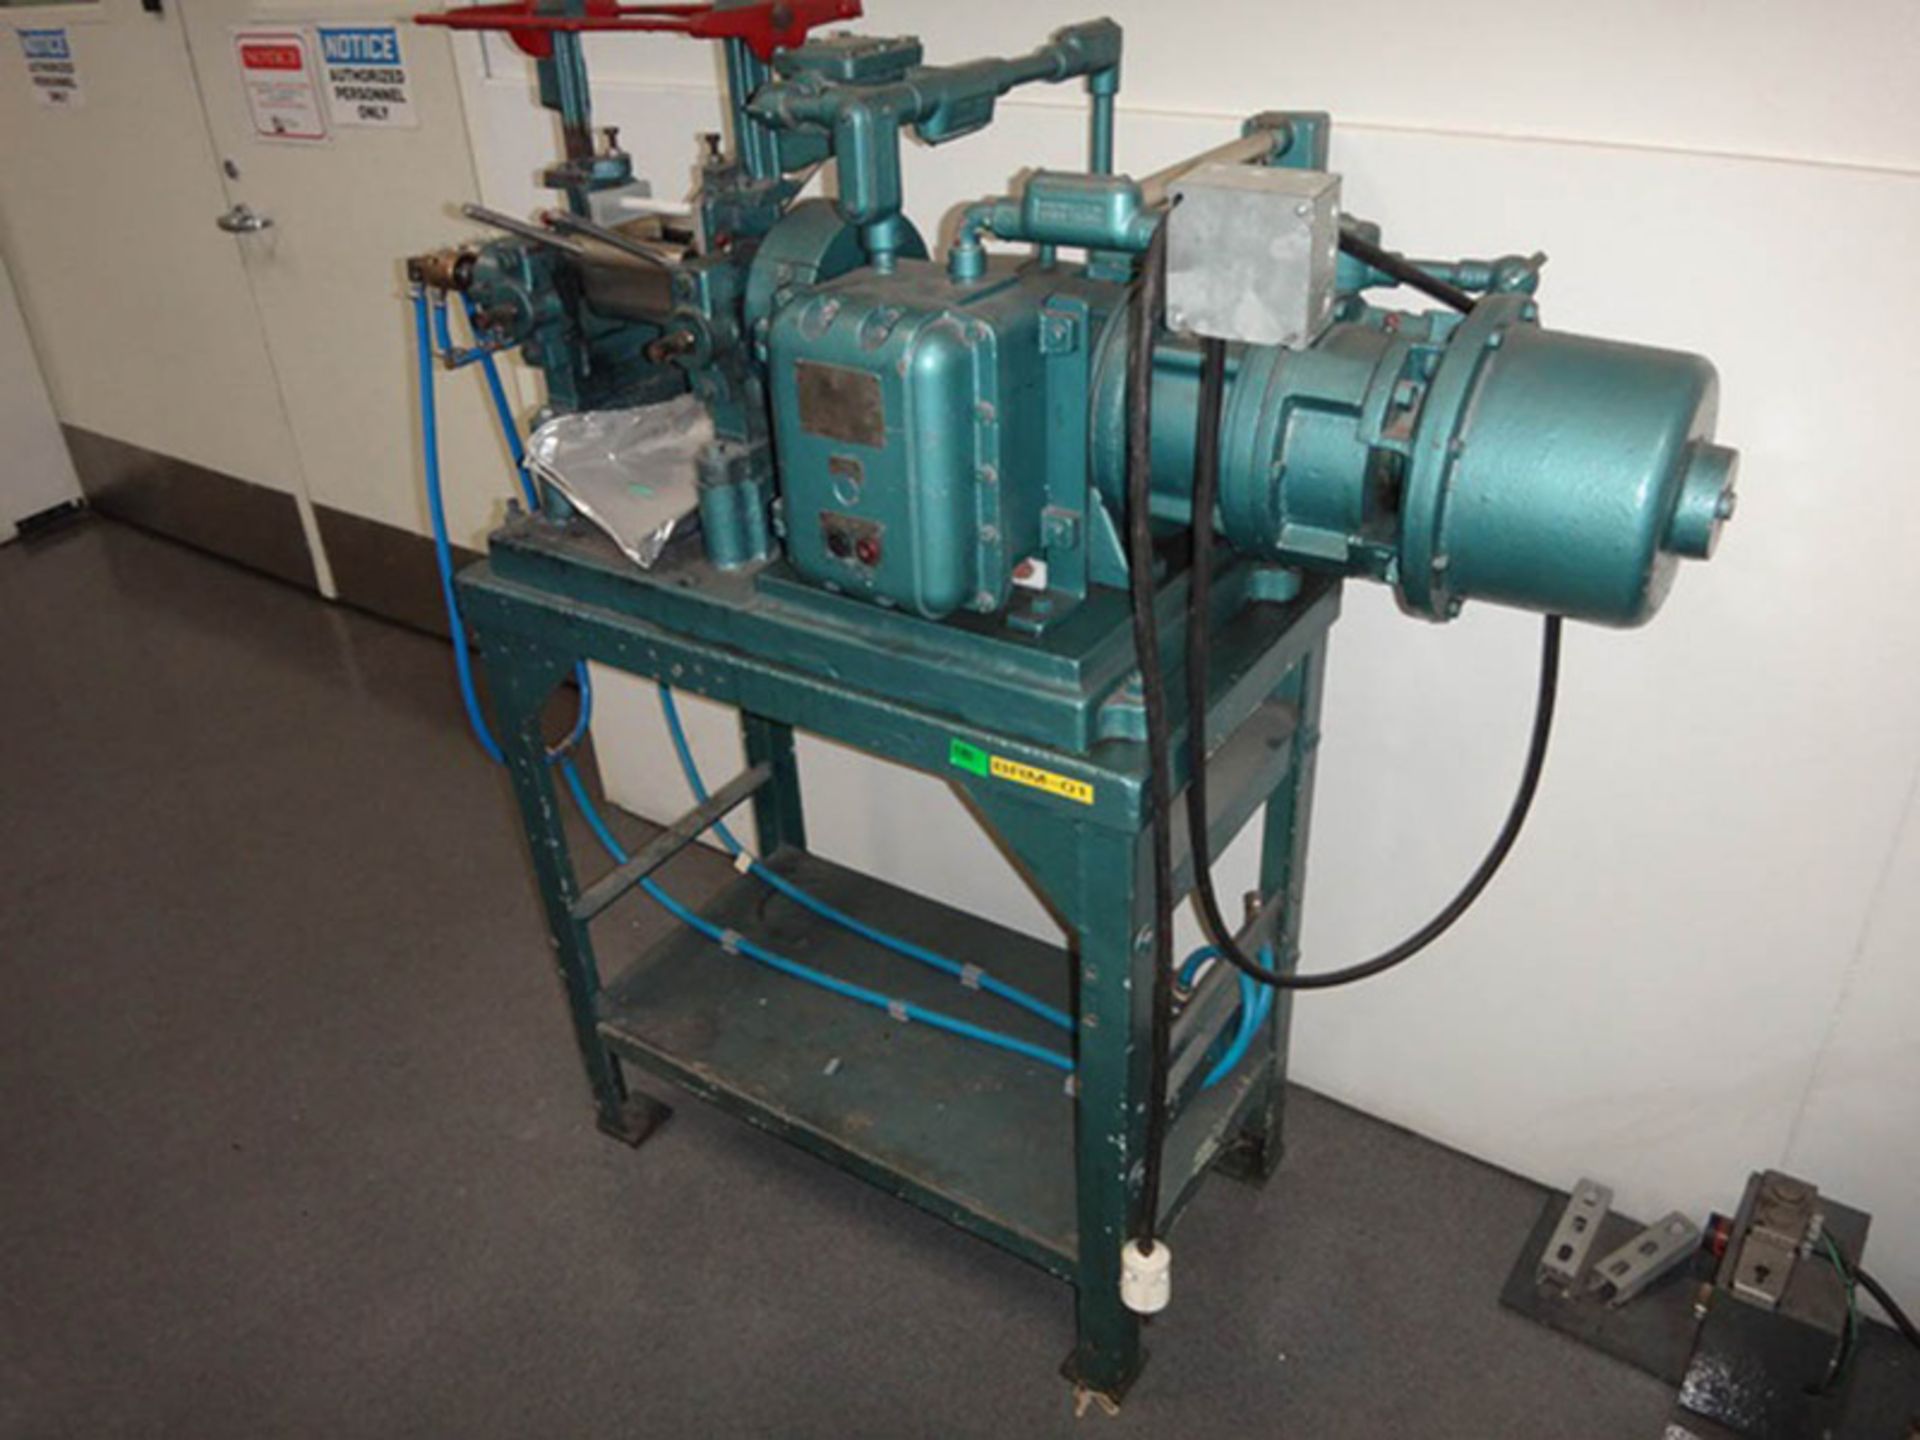 Reliable Lab Two Roll Mill, S/N 2020 - Located At: Huntington Park, CA - Image 4 of 4